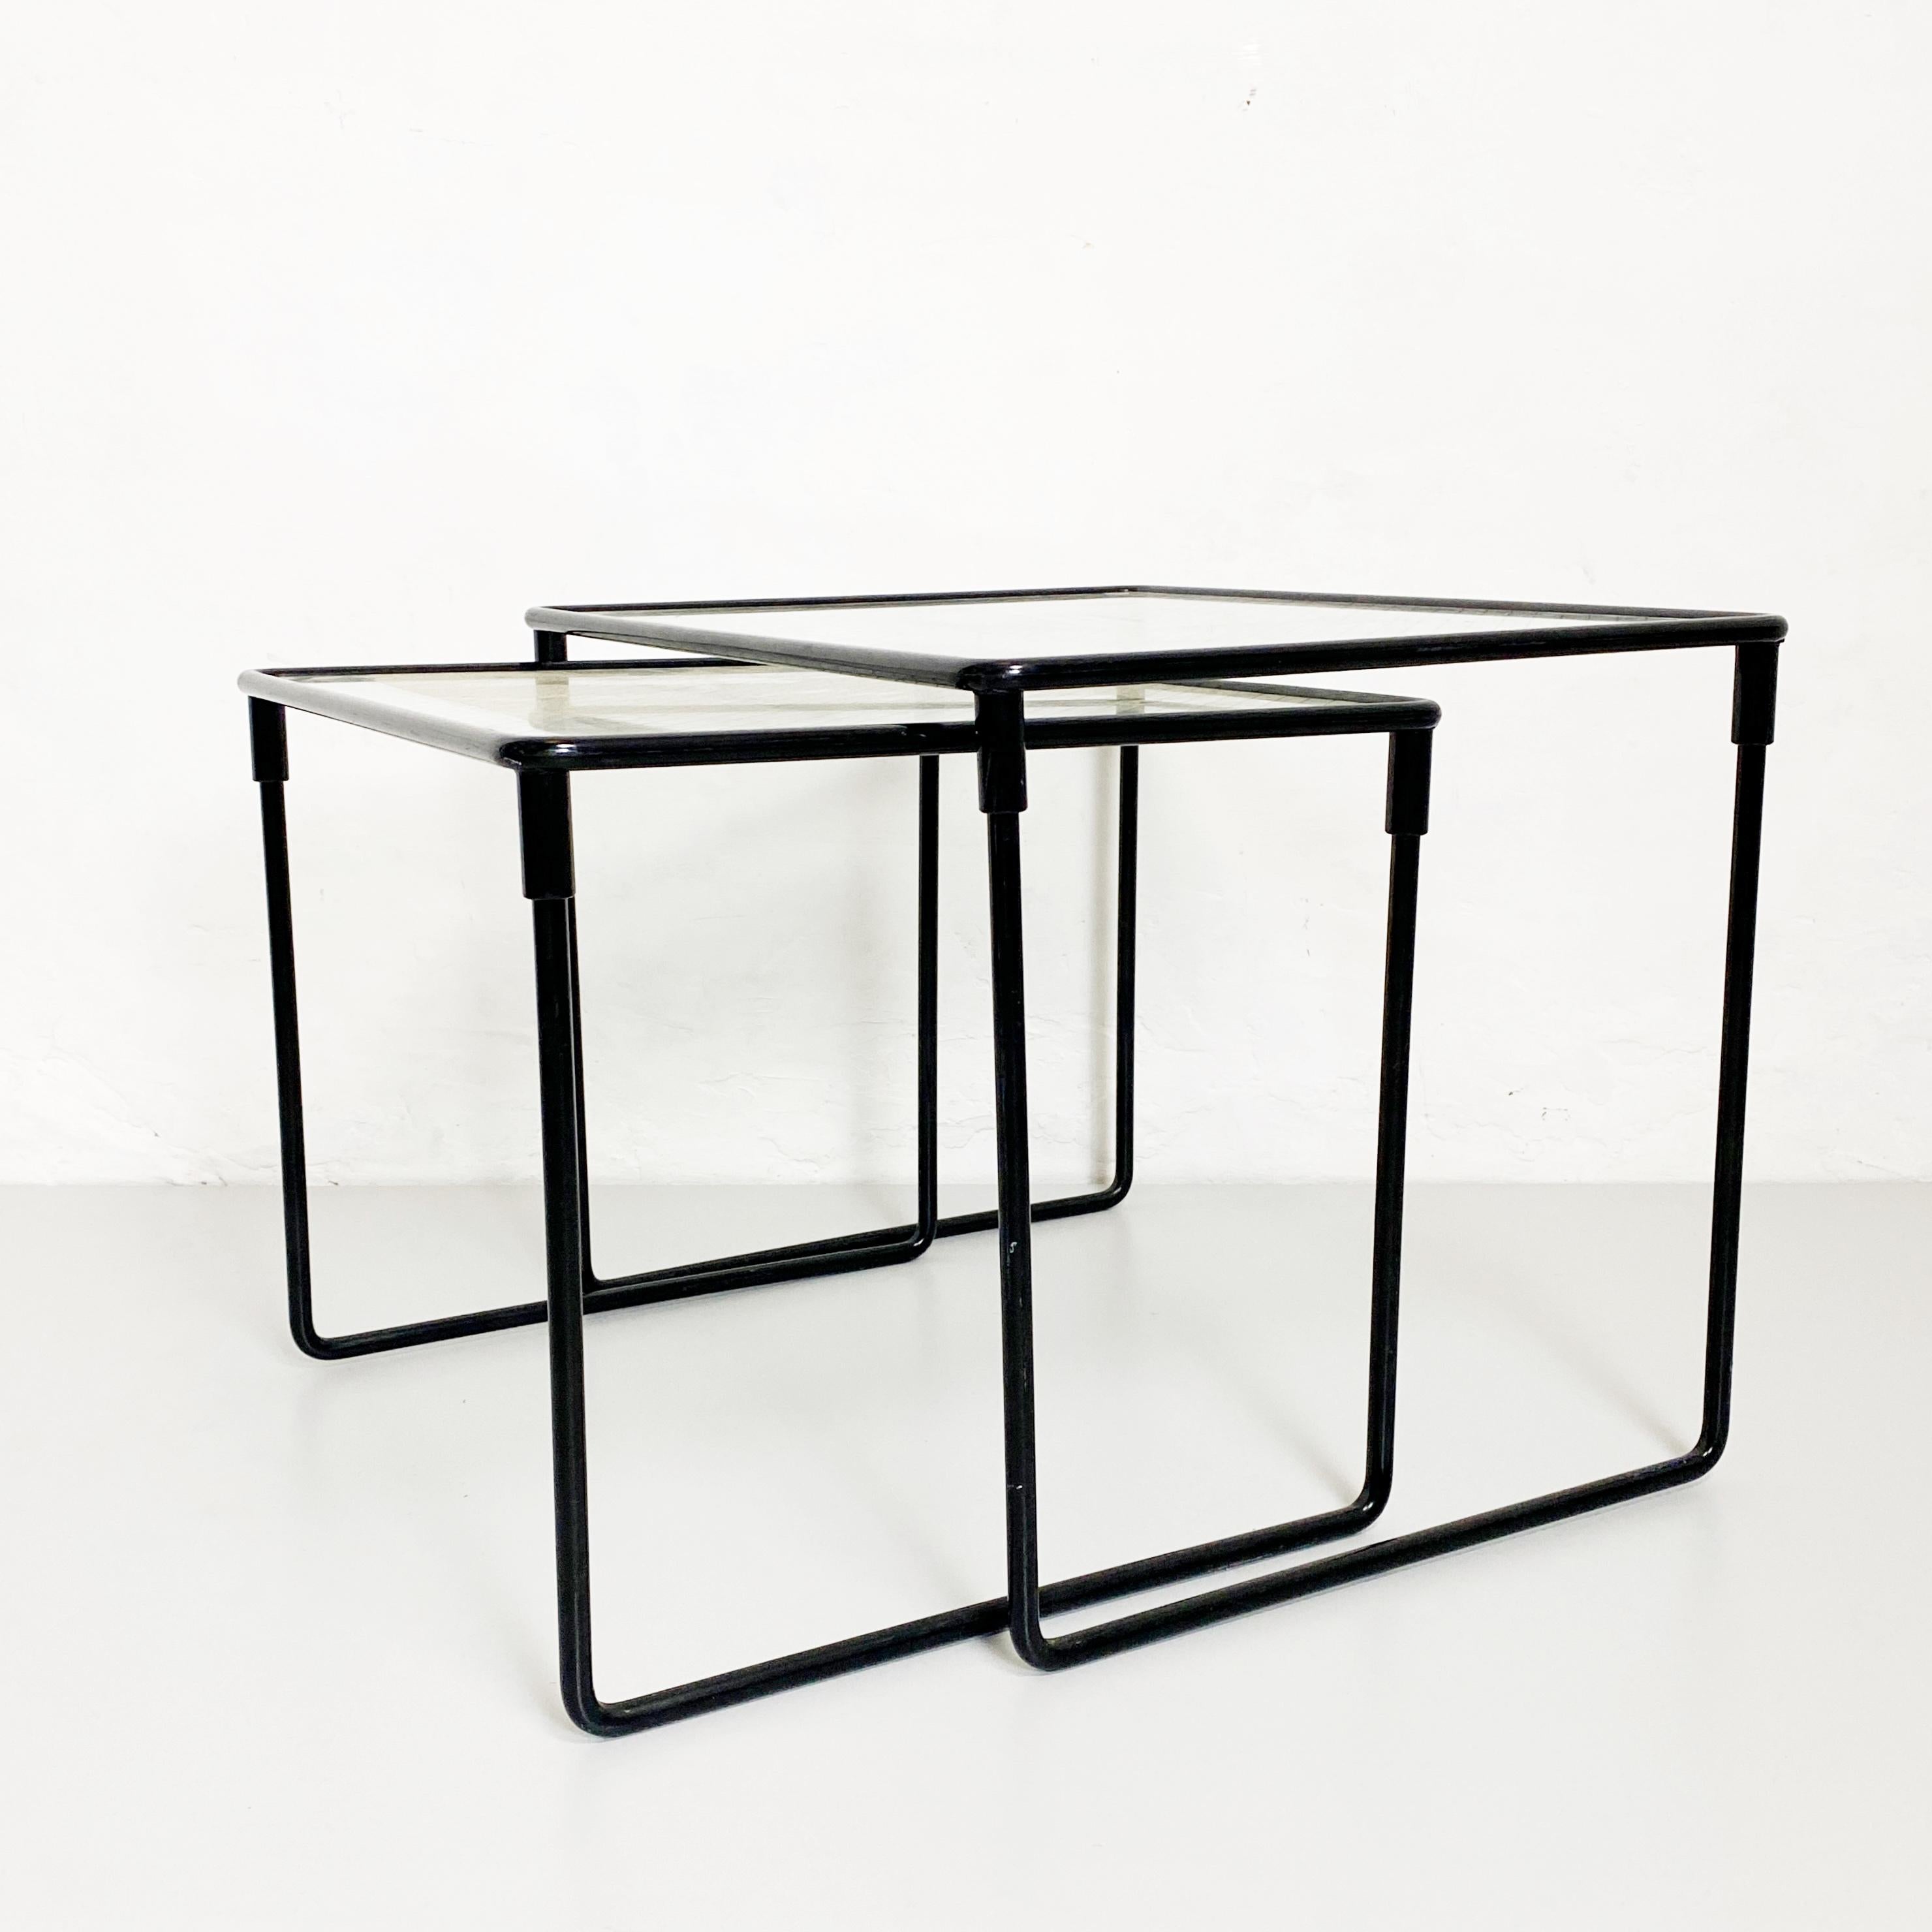 Italian Mid-Century Modern set of metal and glass coffe tables, 1970s 
Set of square coffee tables with structure in metal rod vericatio in black and transparent glass with geometric decoration.

1970s

Good condition, in